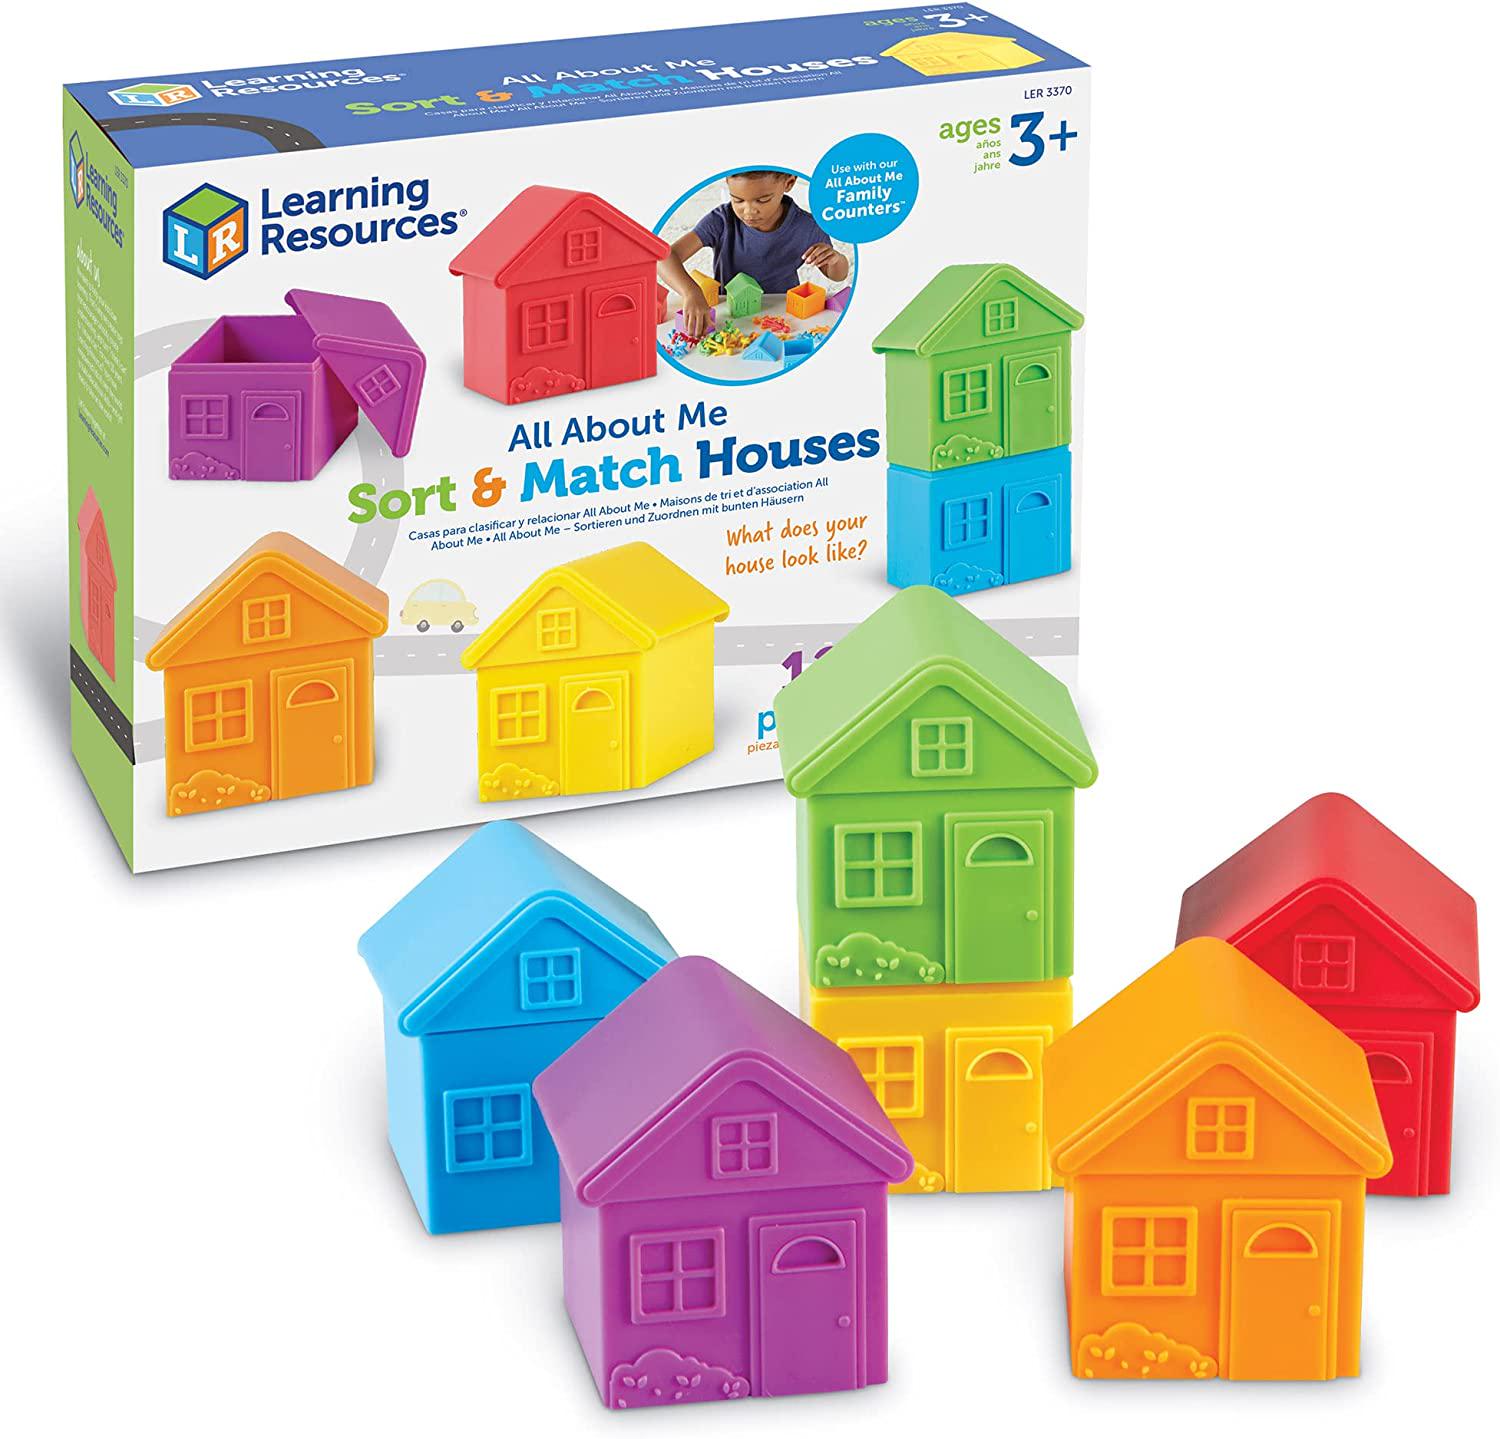 Learning Resources, Learning Resources All About Me Sorting Houses, Fine Motor and Sorting Skills, Montessori Toys, Special Education Actives, Imaginative Play, 12 Pieces, Ages 3+